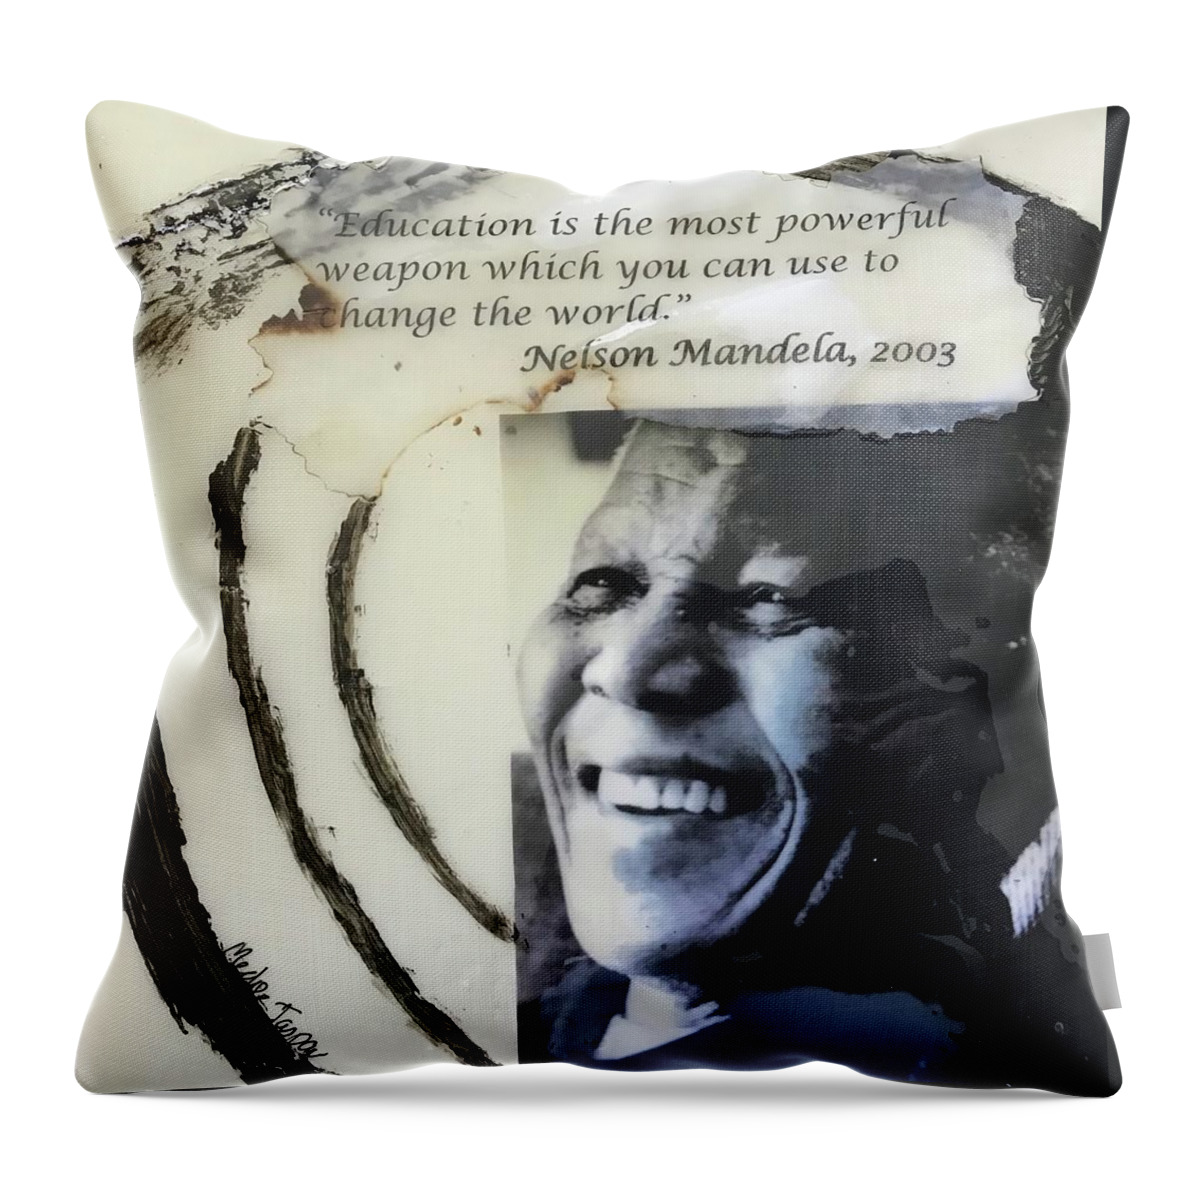 Abstract Art Throw Pillow featuring the painting Nelson Mandela on Education by Medge Jaspan